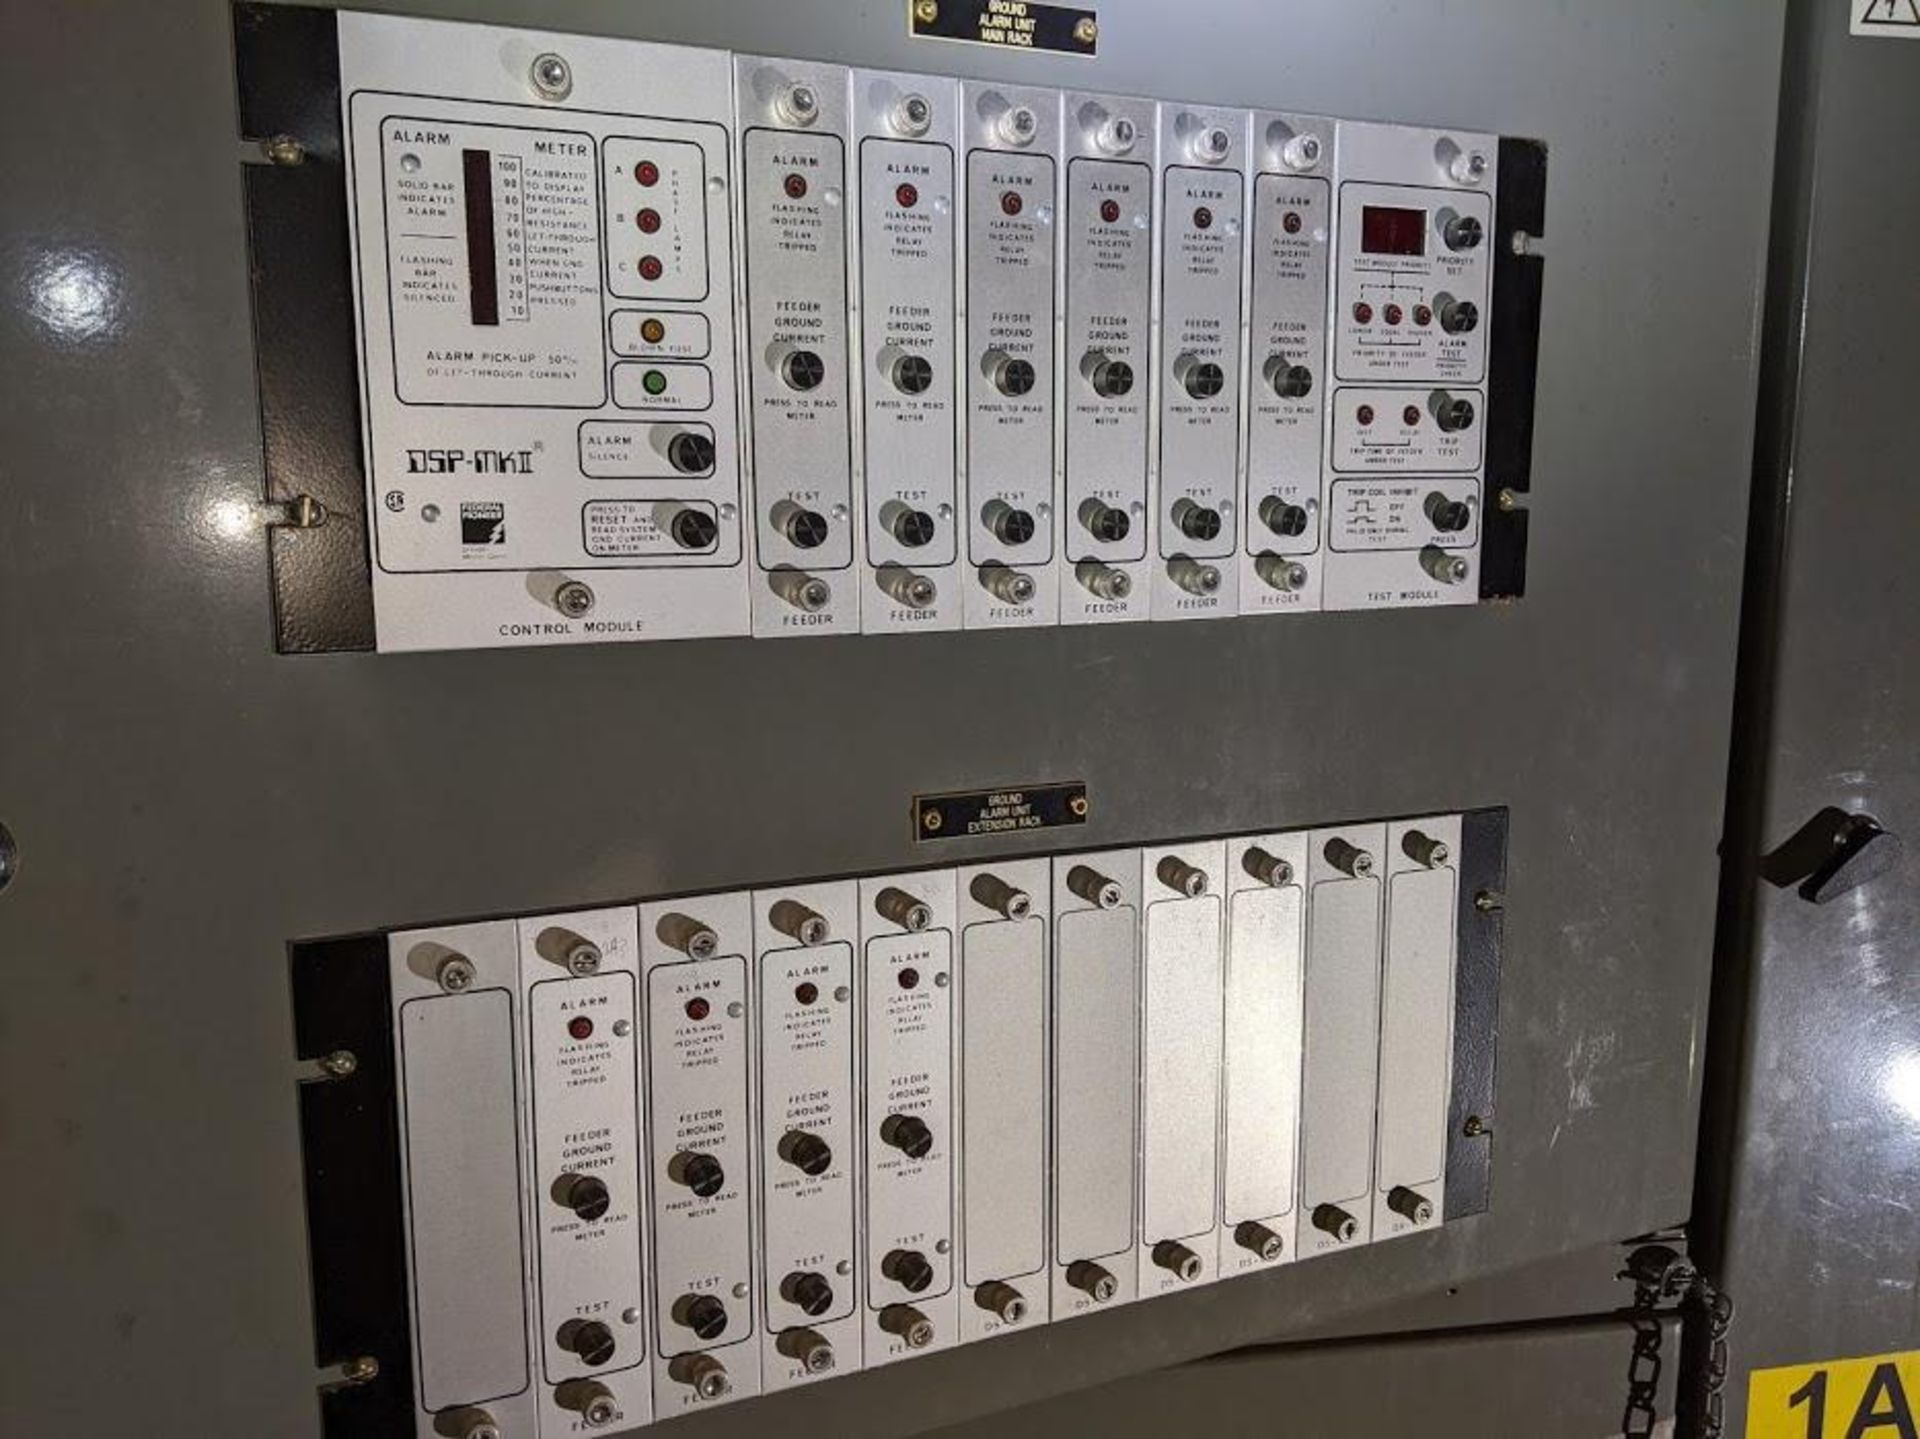 DSP-MK II GROUND FAULT PROTECTION SYSTEM FEDERAL PIONEER WITH 10 FEEDER ALARM CARDS - Image 2 of 7